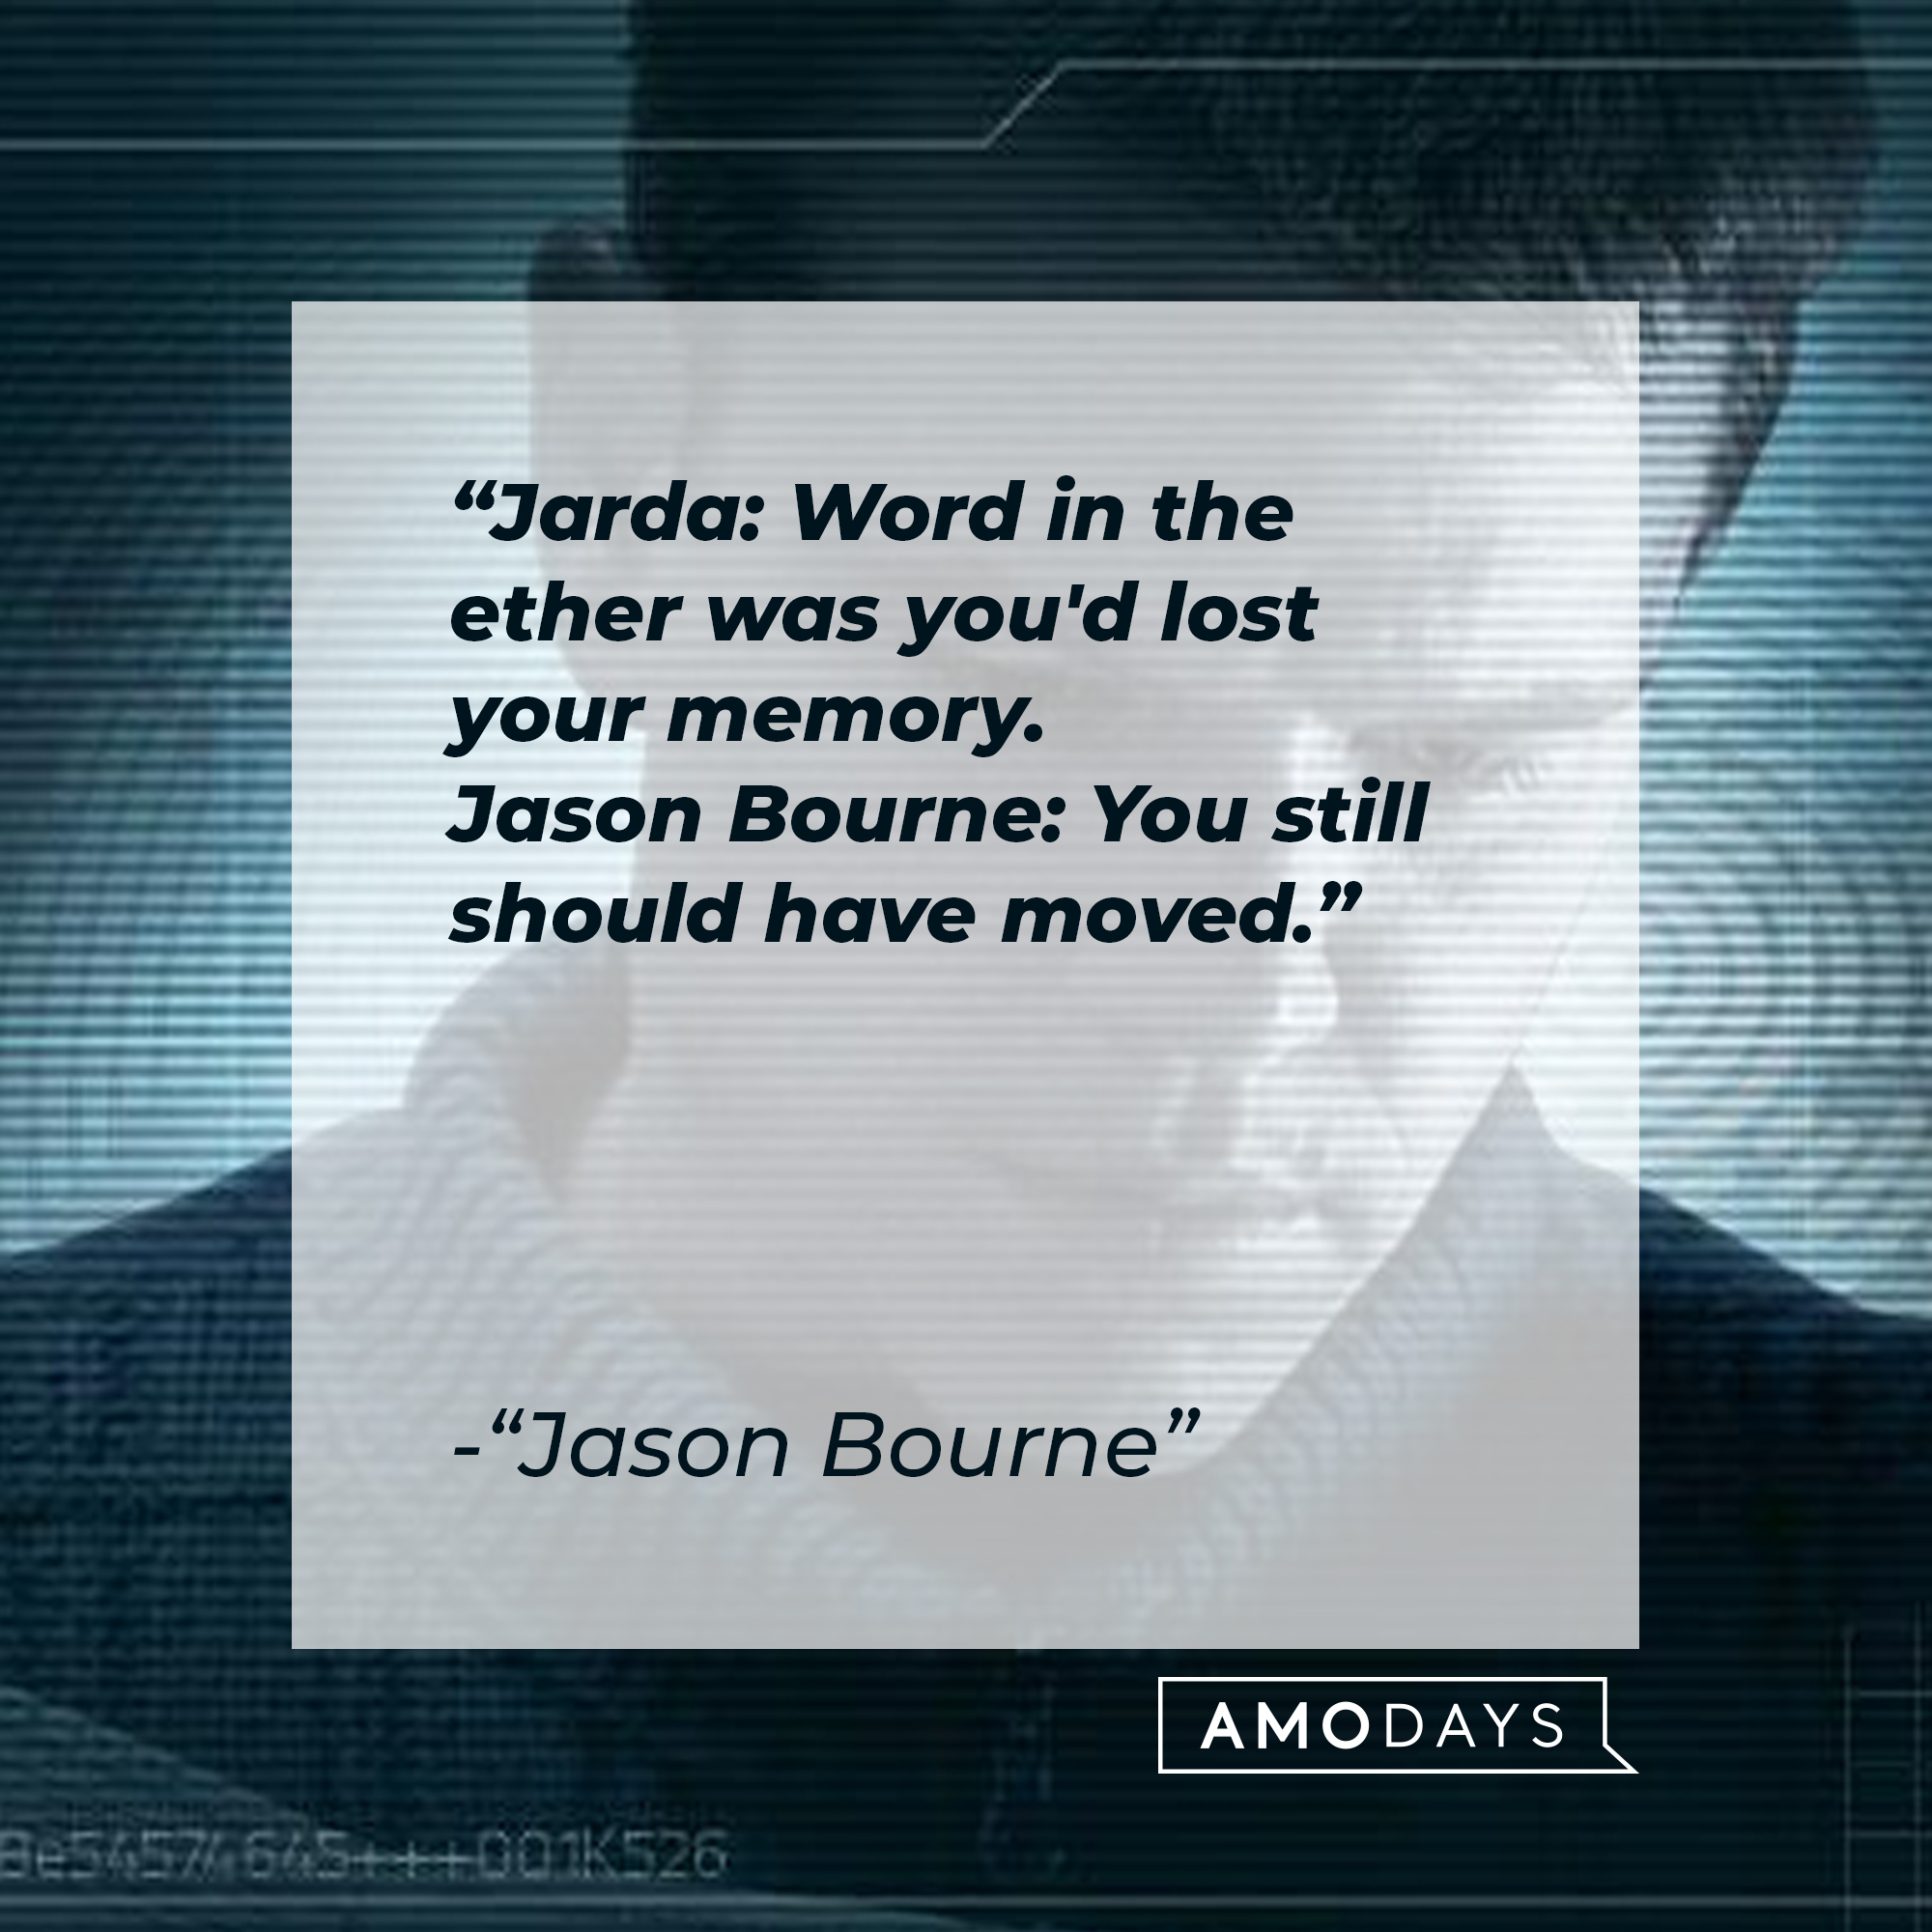 A quote from "Jason Bourne" film: "Jarda: Word in the ether was you'd lost your memory. Jason Bourne: You still should have moved." | Source: facebook.com/TheBourneSeries